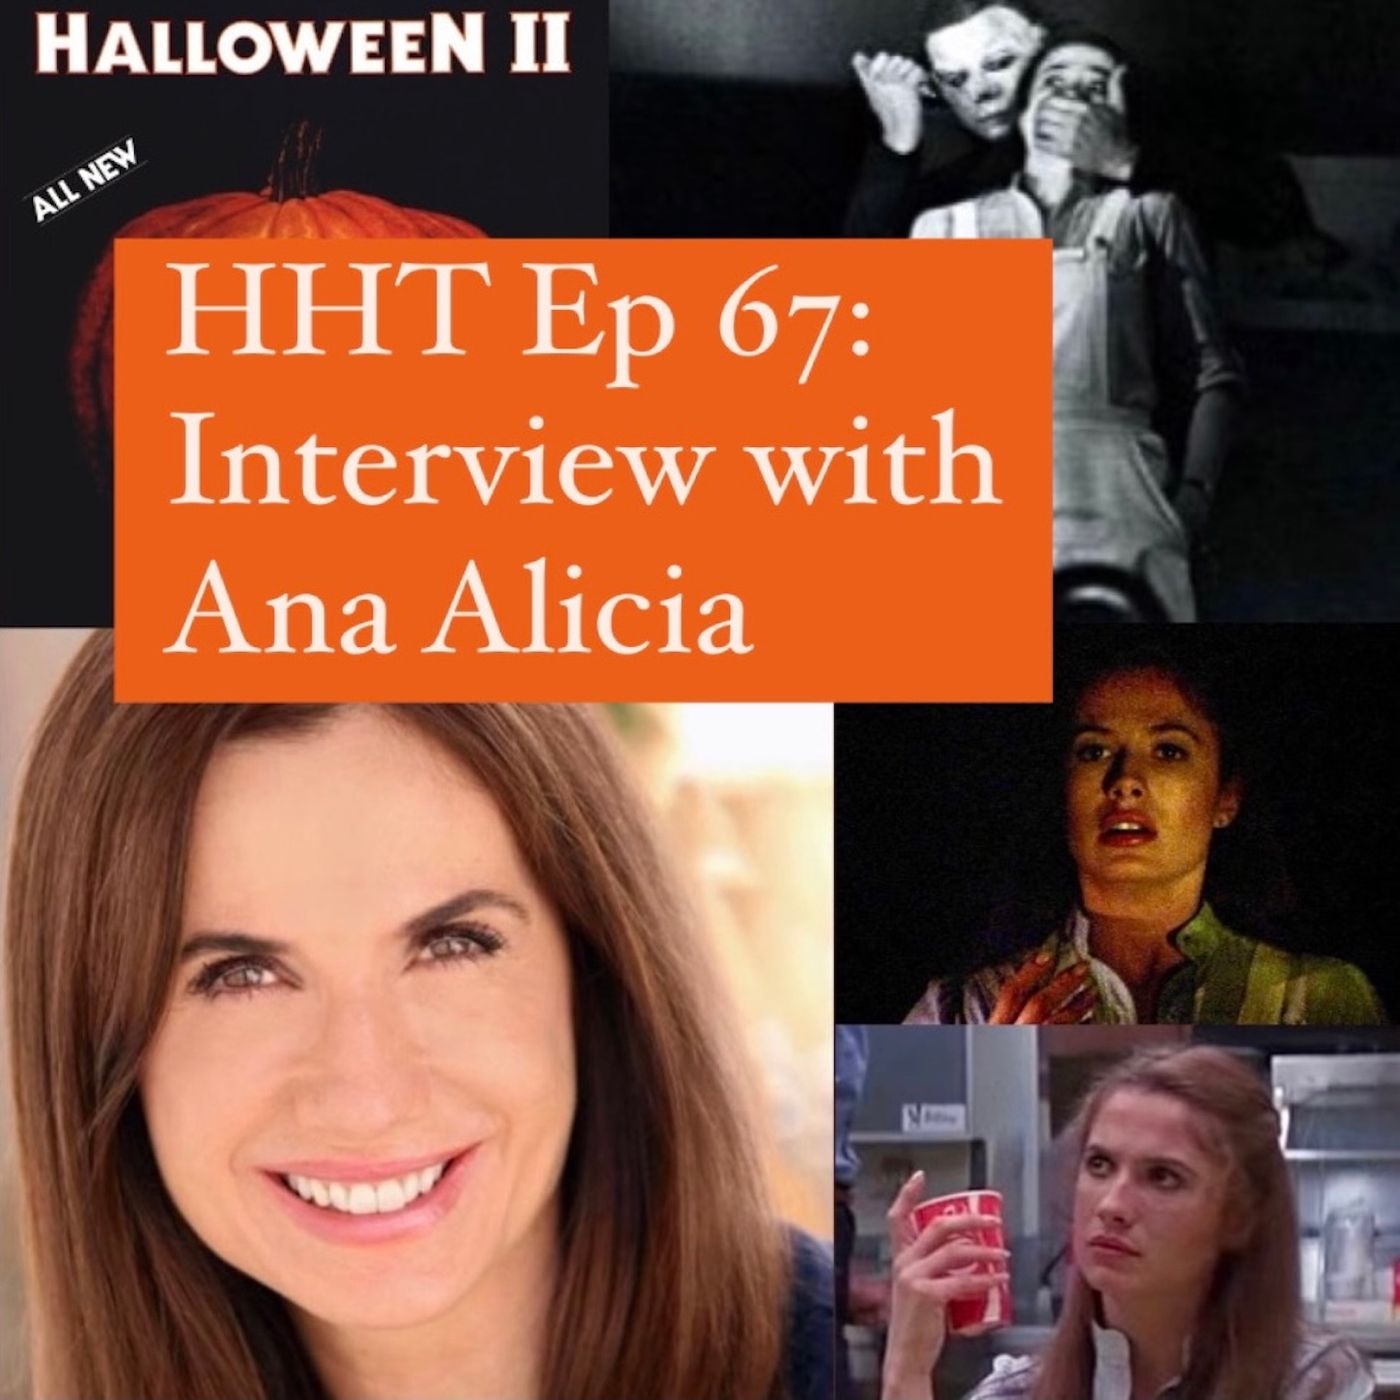 Ep 67: Interview w/Ana Alicia from "Halloween II" (1981) Image